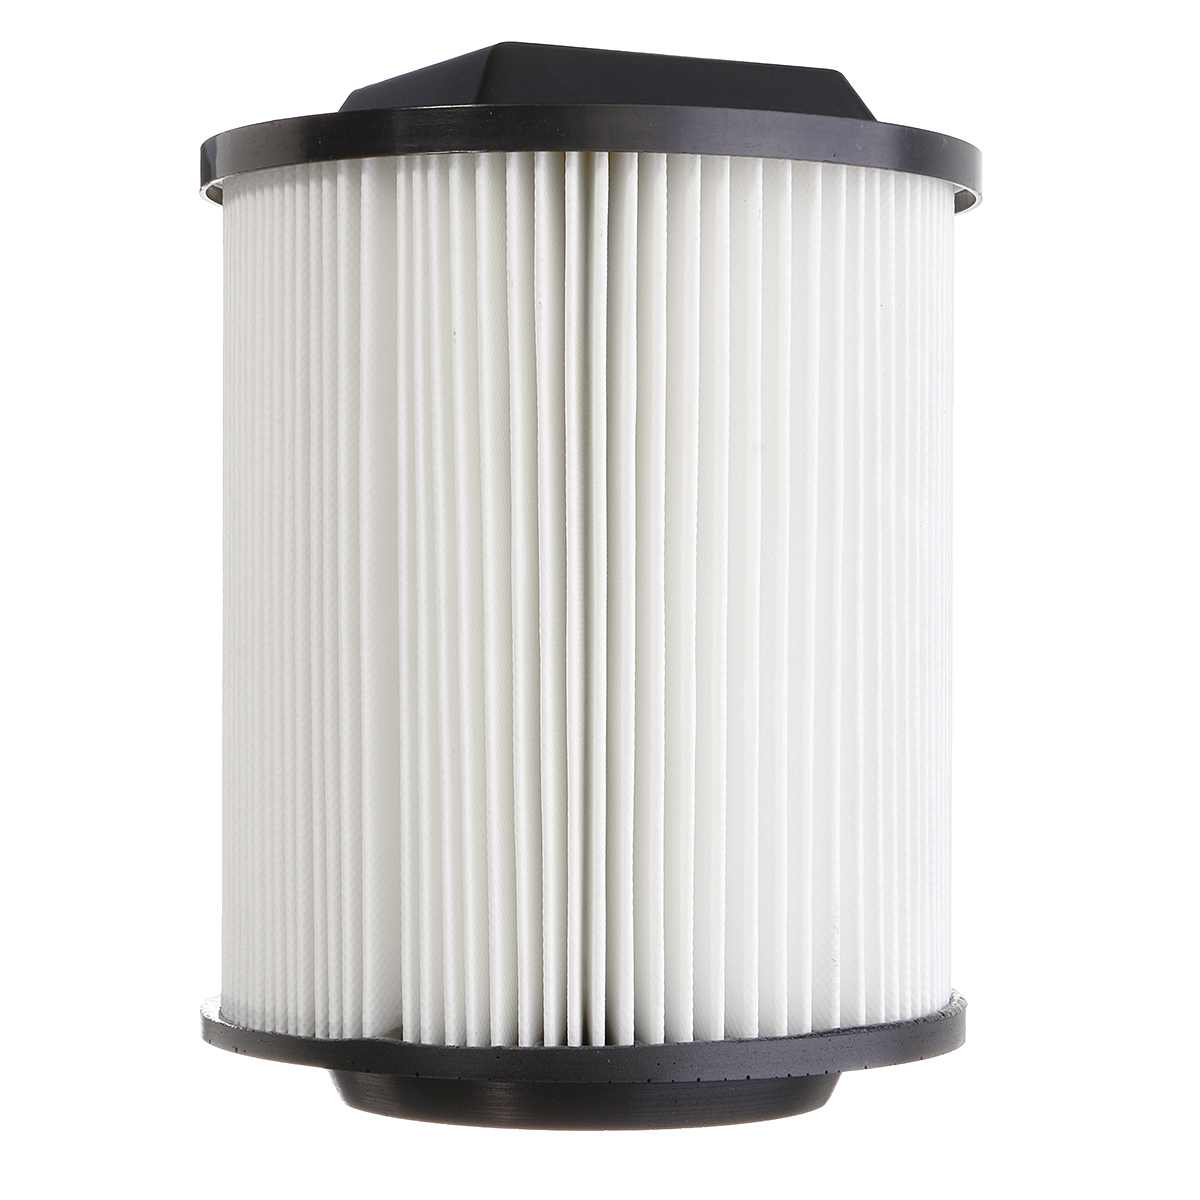 

Wet Dry Replacement Filter Ridgid VF5000 3-Layer Vacuum Filter For Vacuum Cleaners 6-20 Gallon